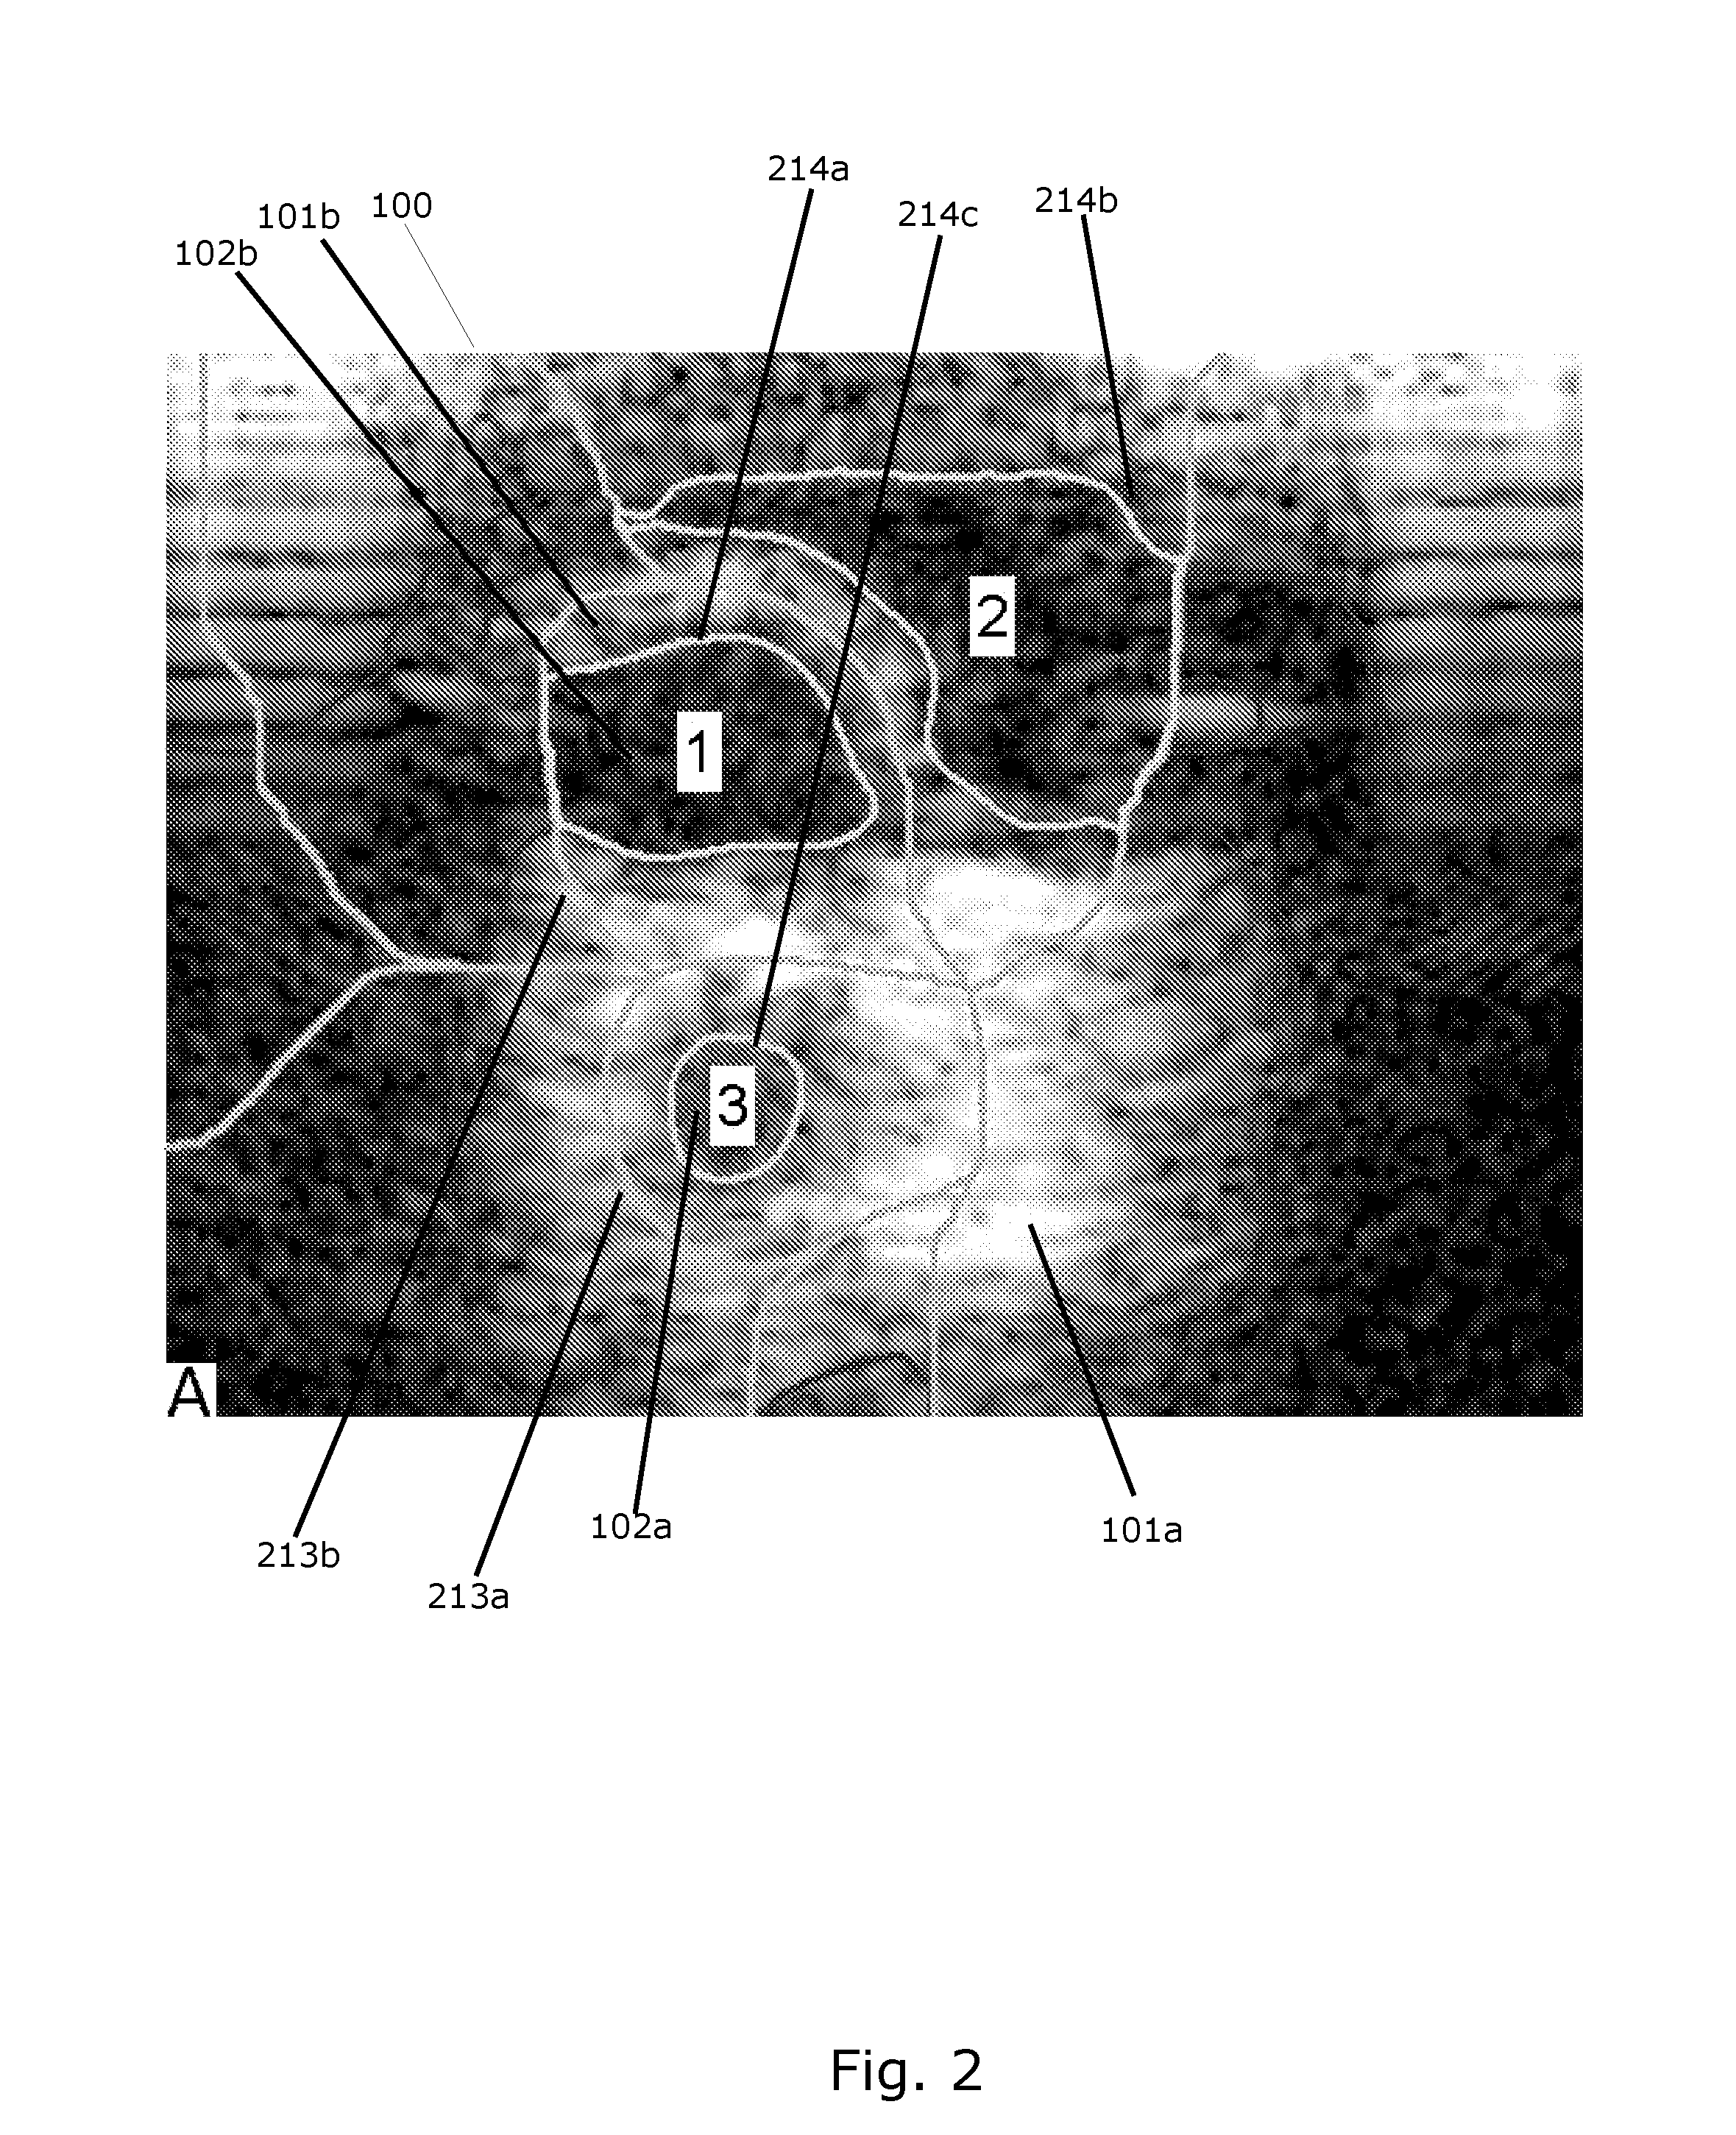 System for detecting blood vessel structures in medical images